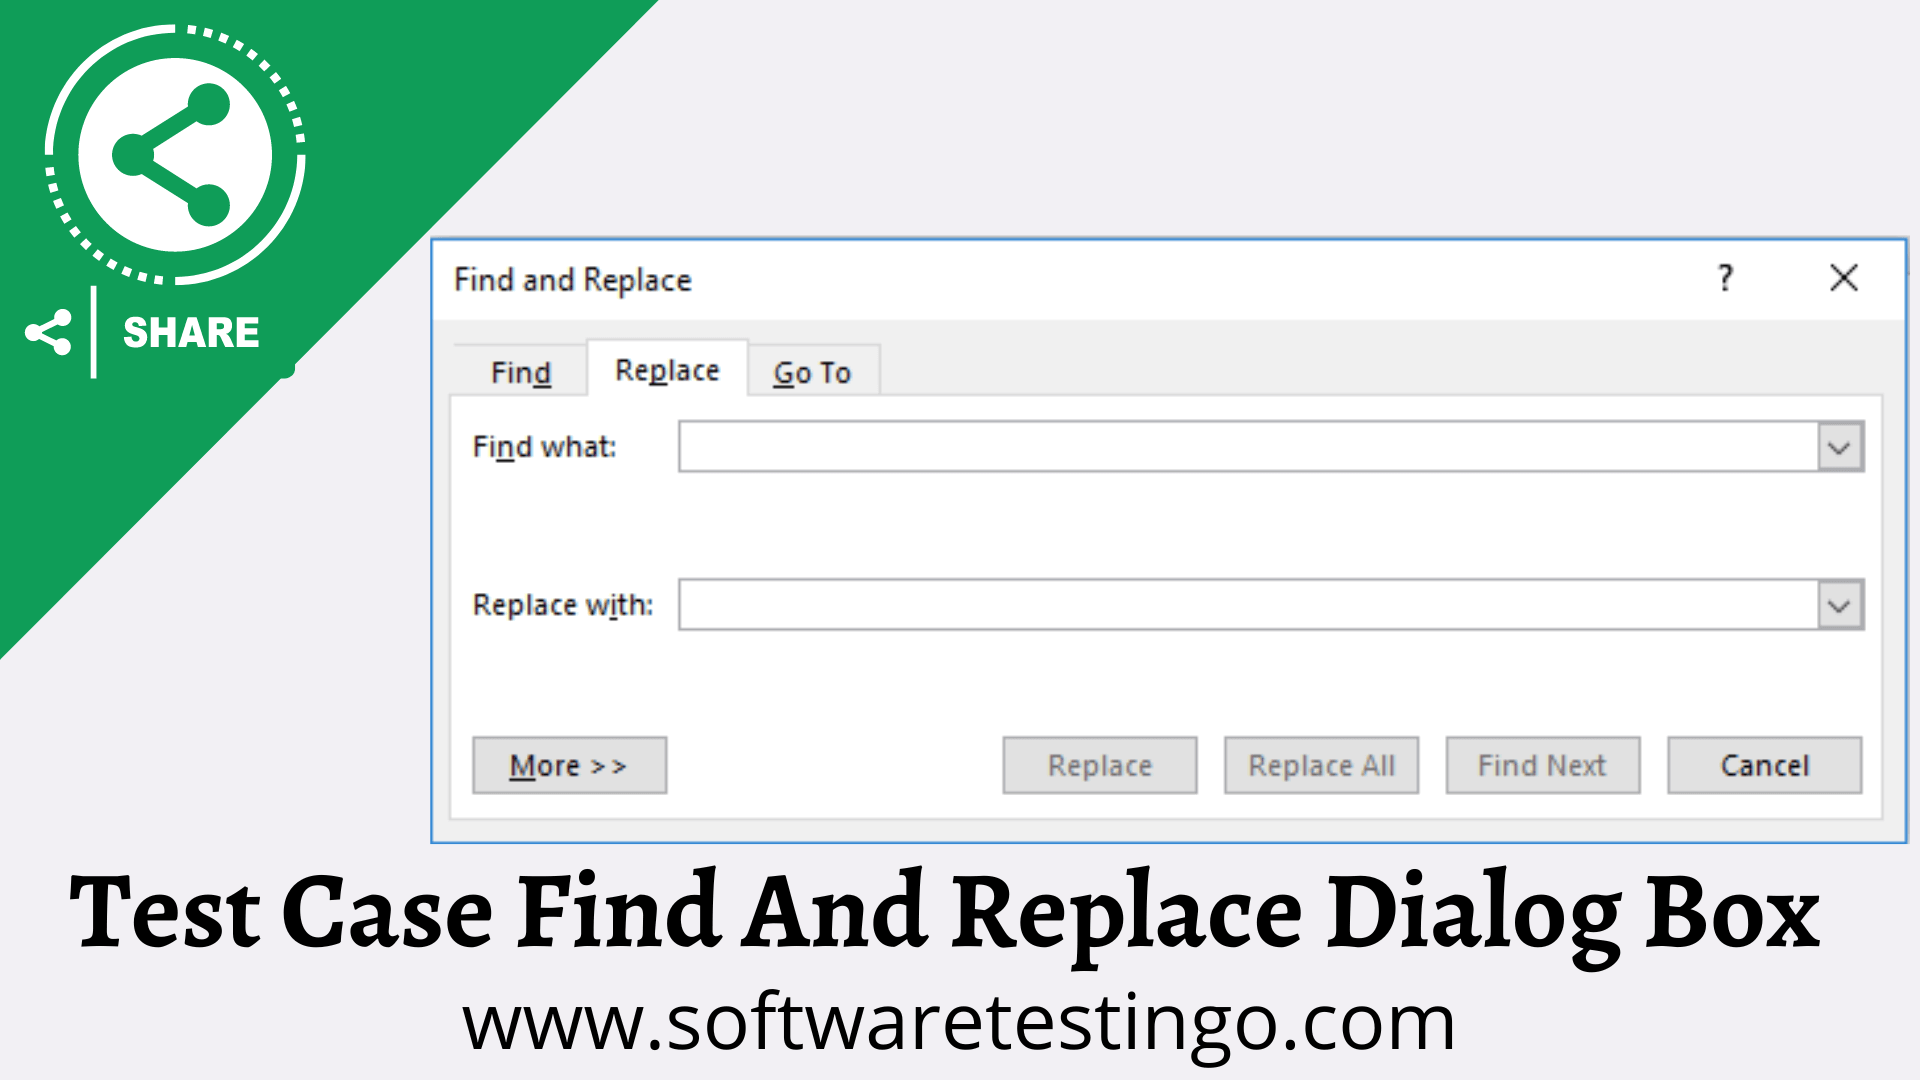 Test Case Find And Replace Dialog Box